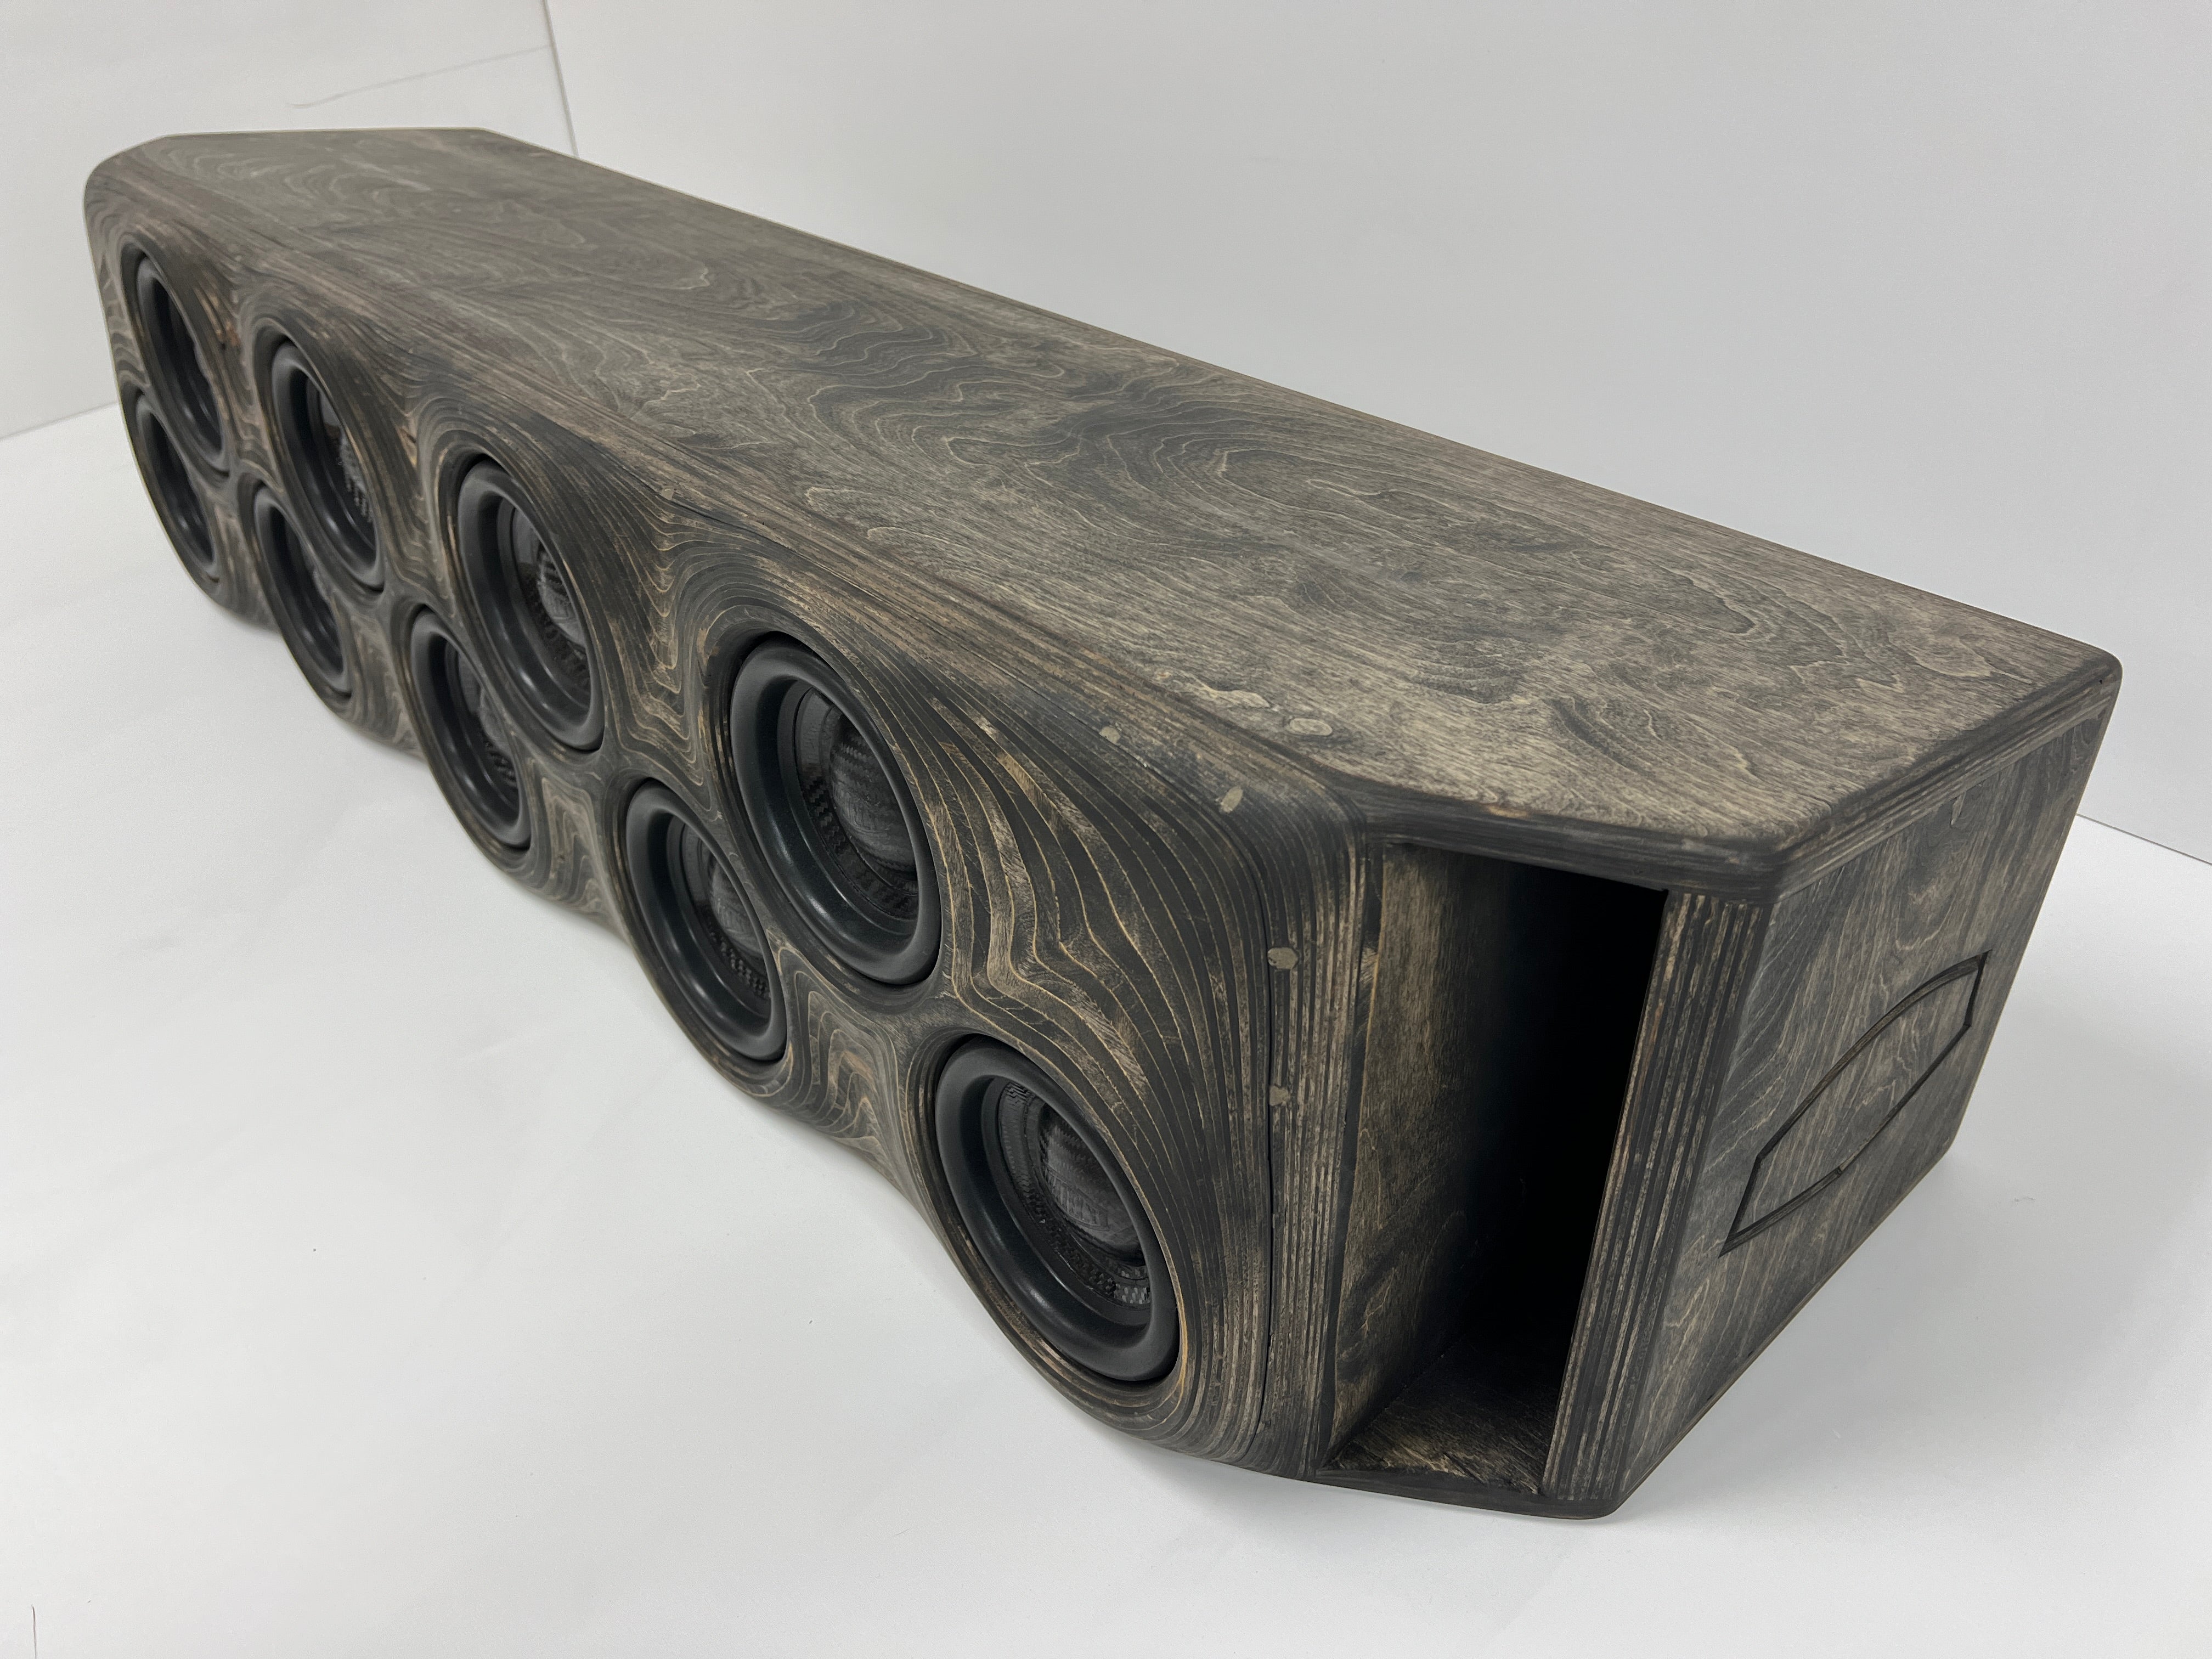 Ford CrewCab 9 x 6.5” with 3.75 " Seat Lift - USED, INCLUDES SUBWOOFERS